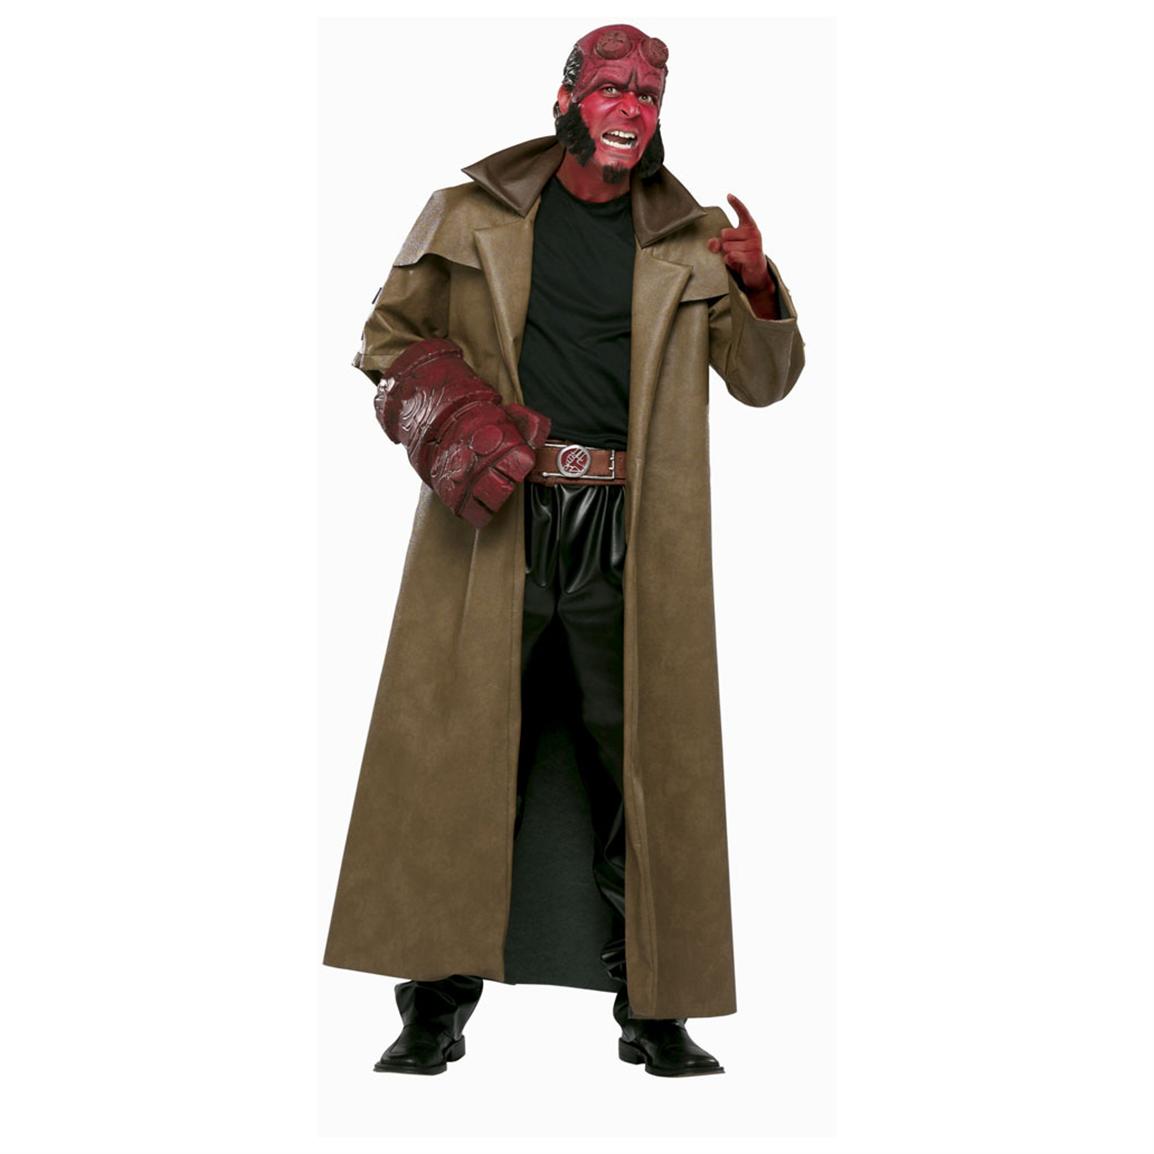 Adult Hellboy Costume - 193770, Costumes at Sportsman's Guide